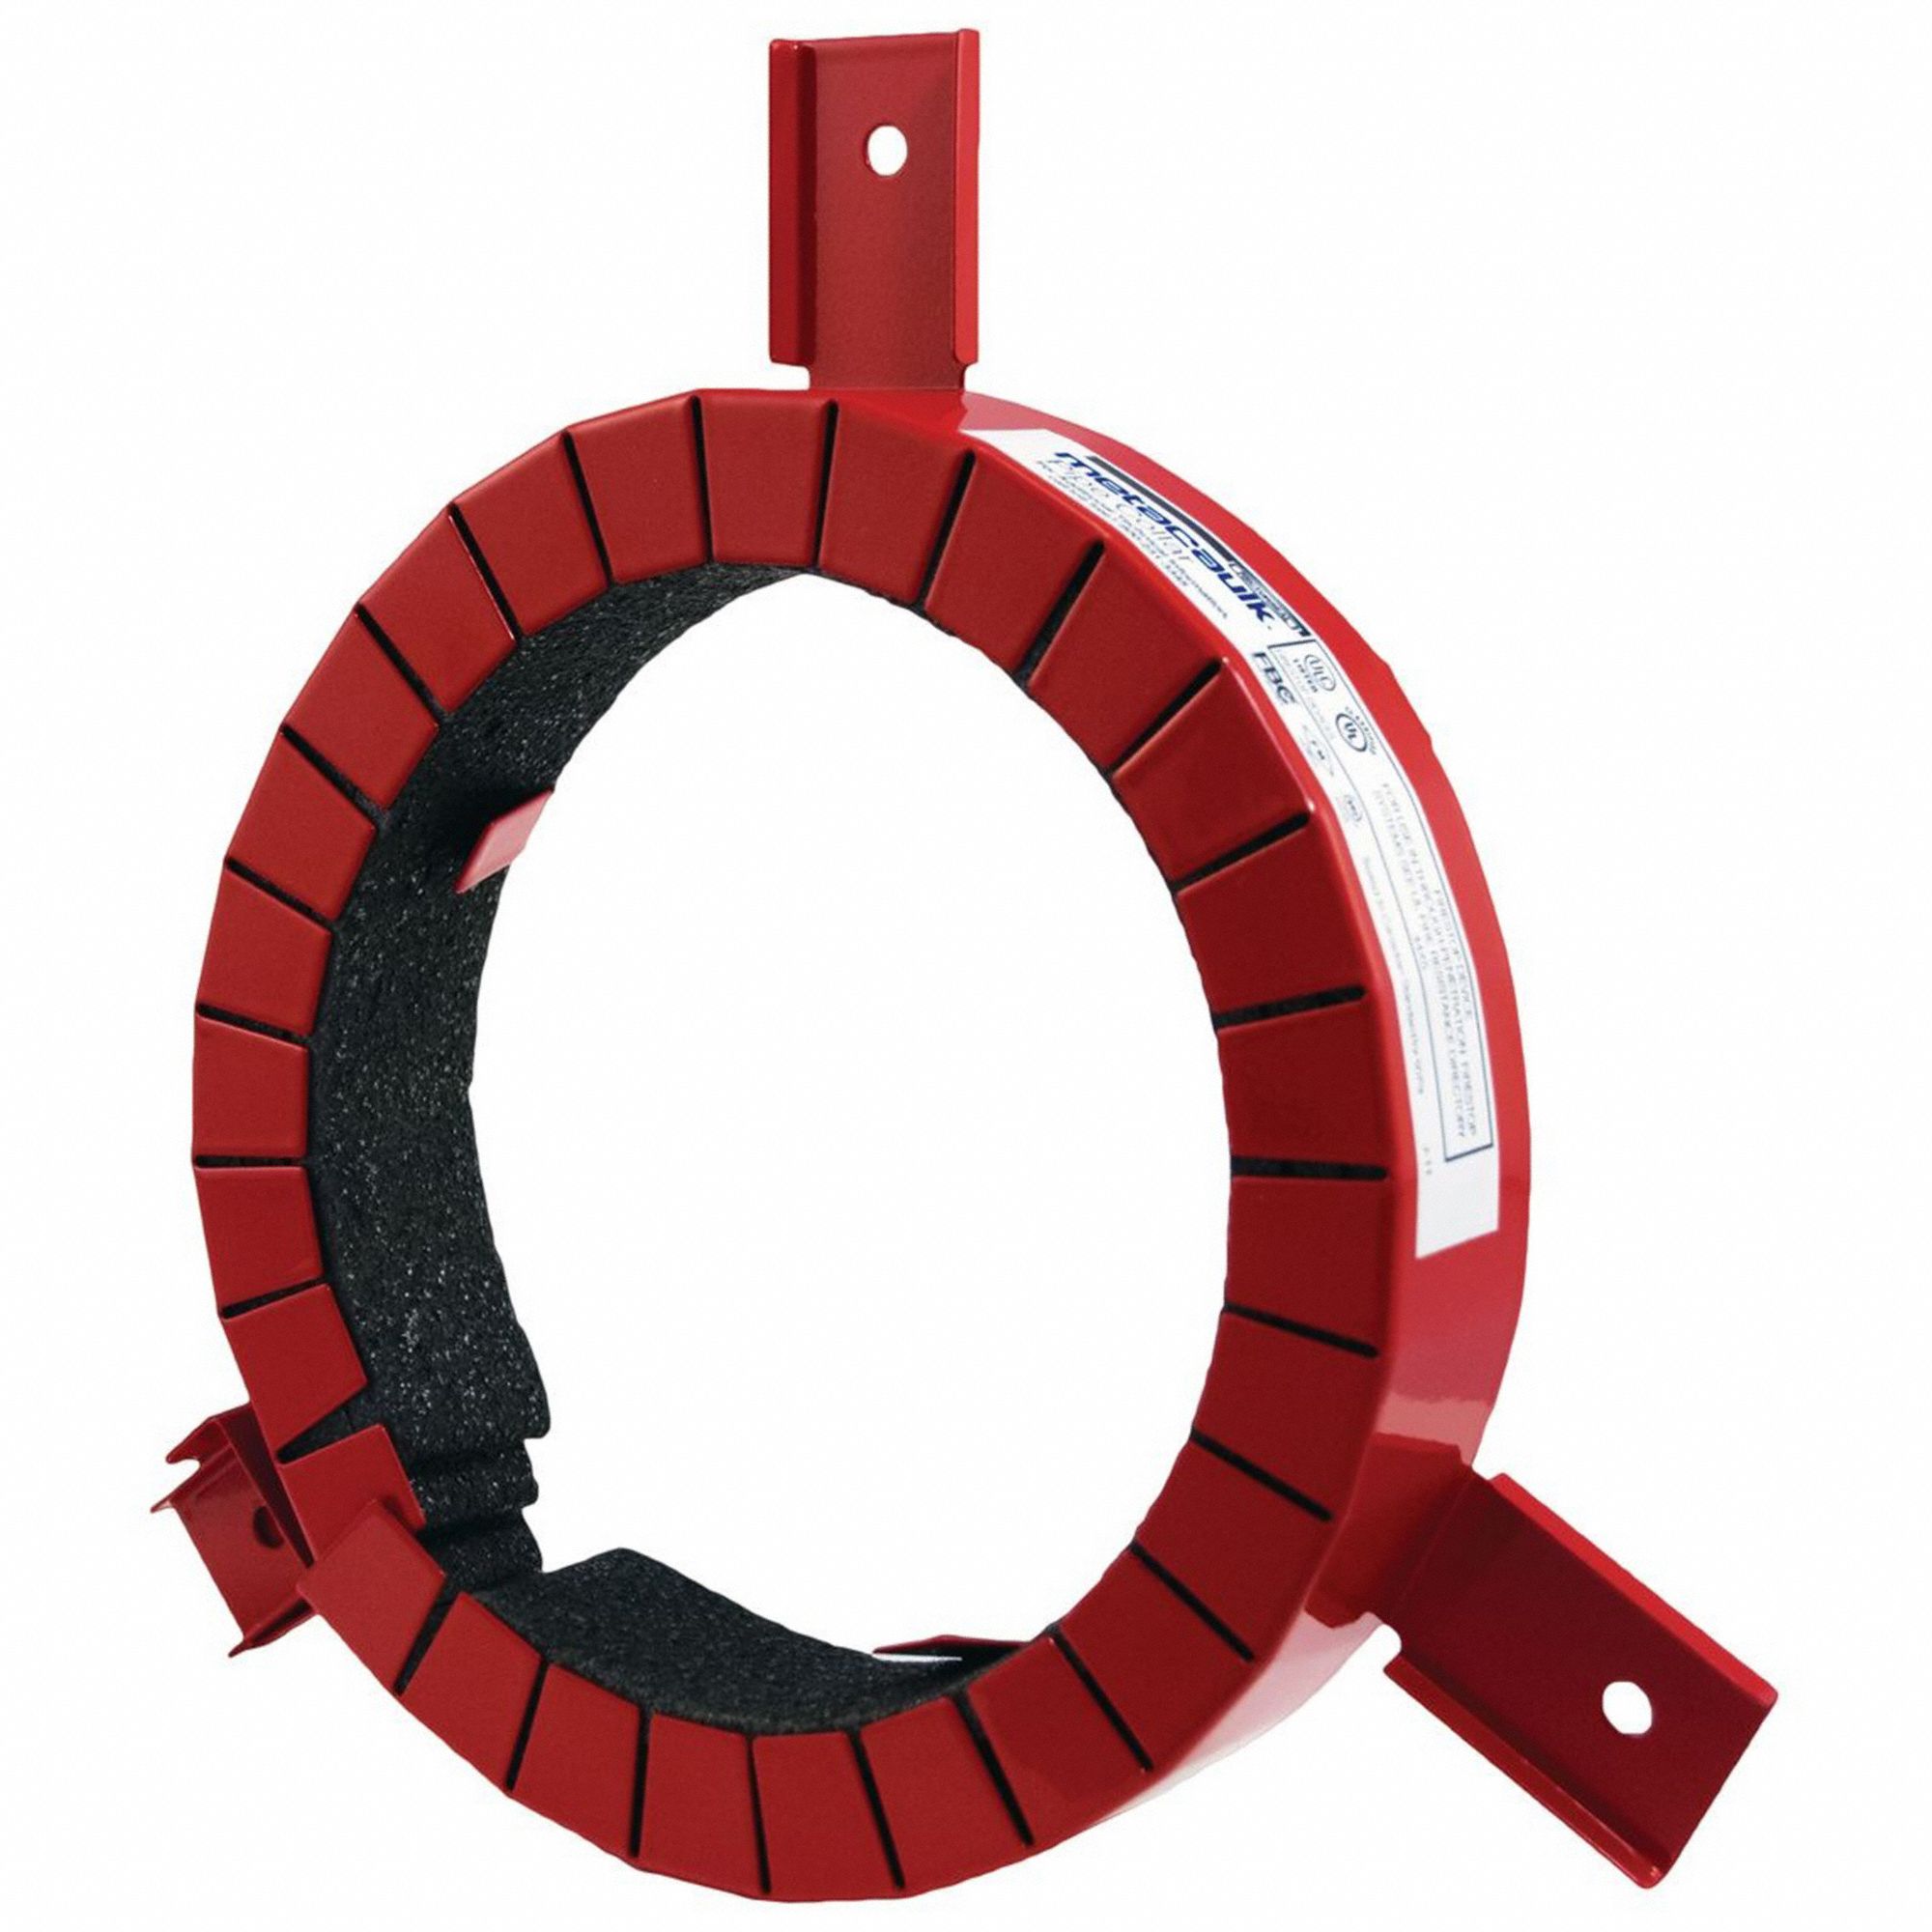 Firestop Pipe Collar: 4 in For Pipe Size, Metal Pipe/Plastic Pipe, Up to 3 hr, 9 in Ht